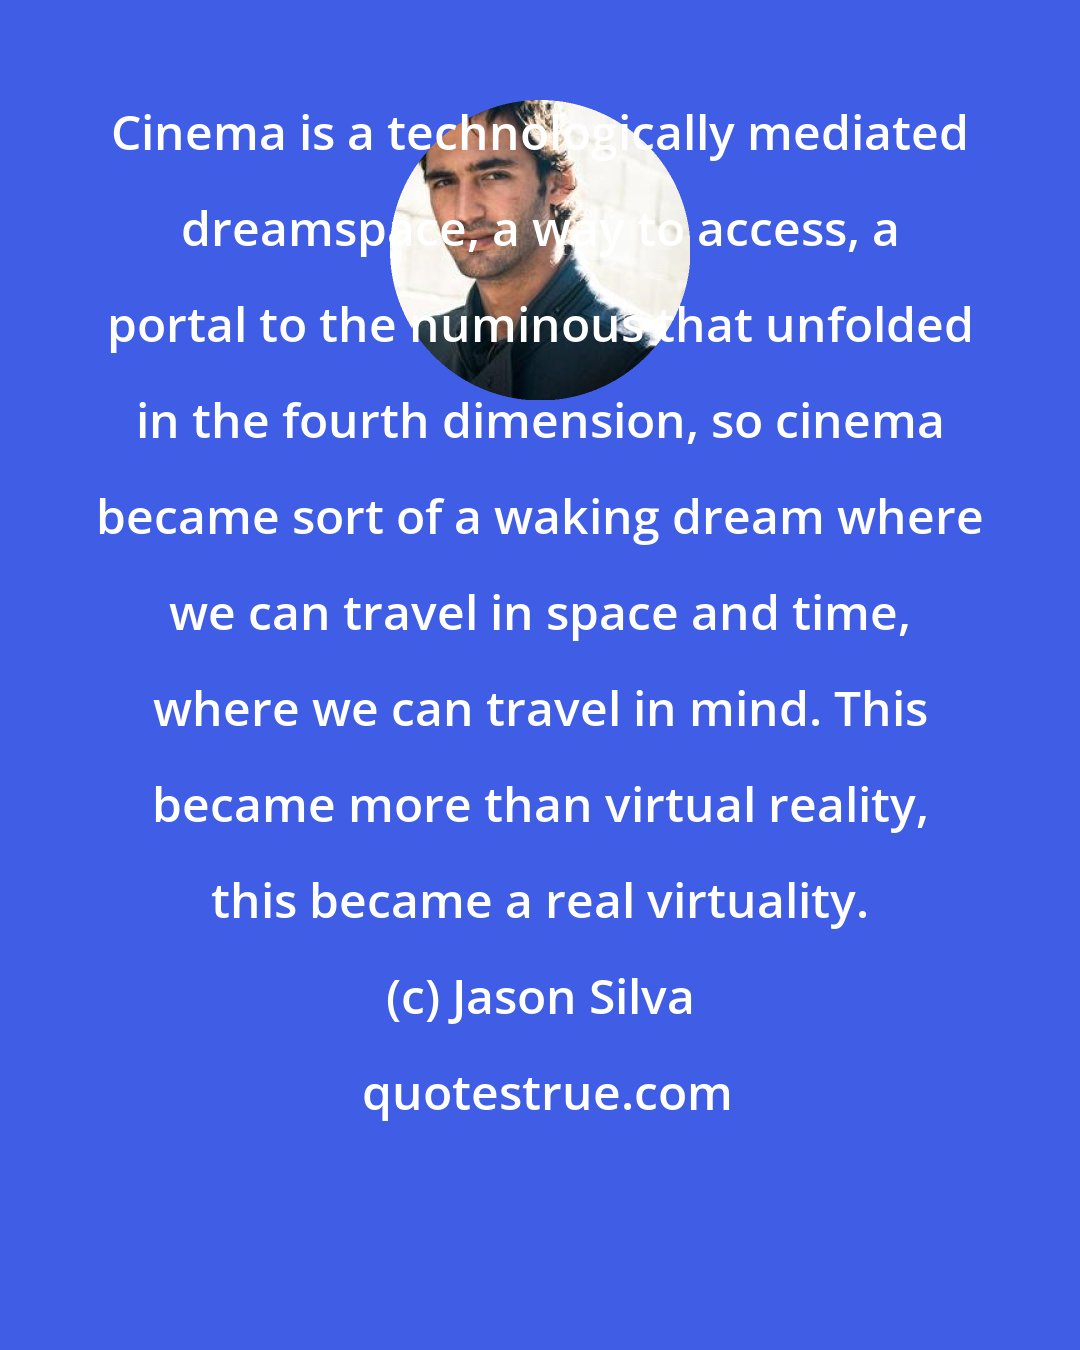 Jason Silva: Cinema is a technologically mediated dreamspace, a way to access, a portal to the numinous that unfolded in the fourth dimension, so cinema became sort of a waking dream where we can travel in space and time, where we can travel in mind. This became more than virtual reality, this became a real virtuality.